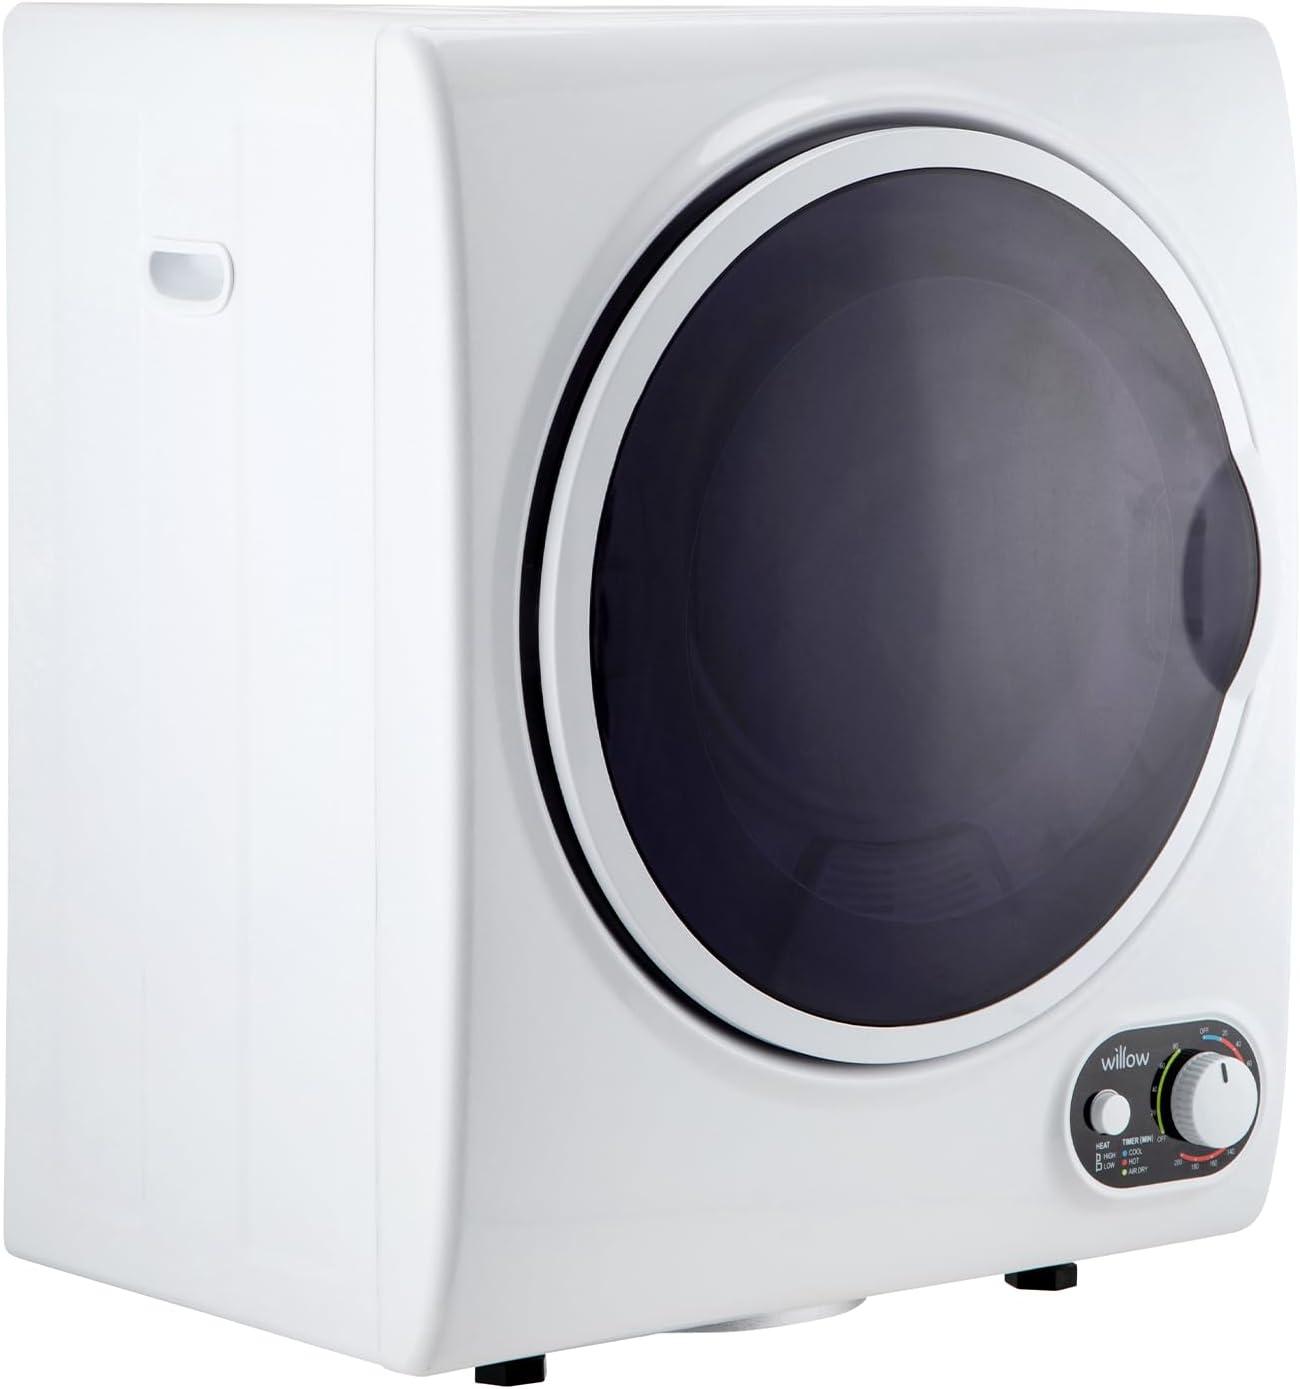 Willow WTD25 2.5kg Freestanding Vented Tumble Dryer Compact and Portable, 3 Temperature Settings, Crease Guard, and 2 Years Warranty for peace of mind (White) - Amazing Gadgets Outlet